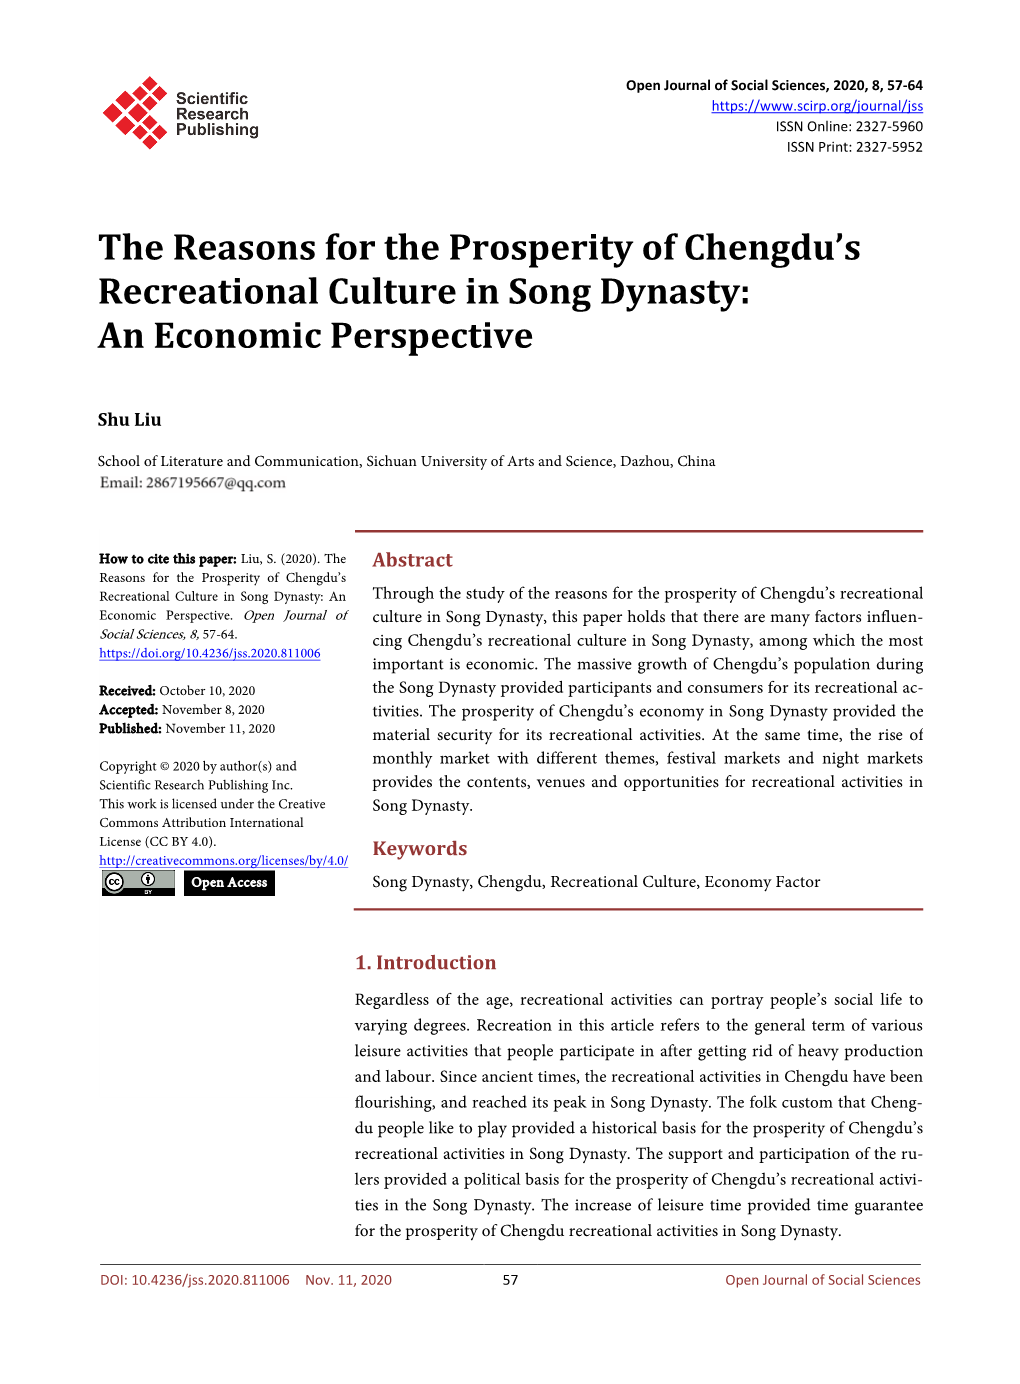 The Reasons for the Prosperity of Chengdu's Recreational Culture In